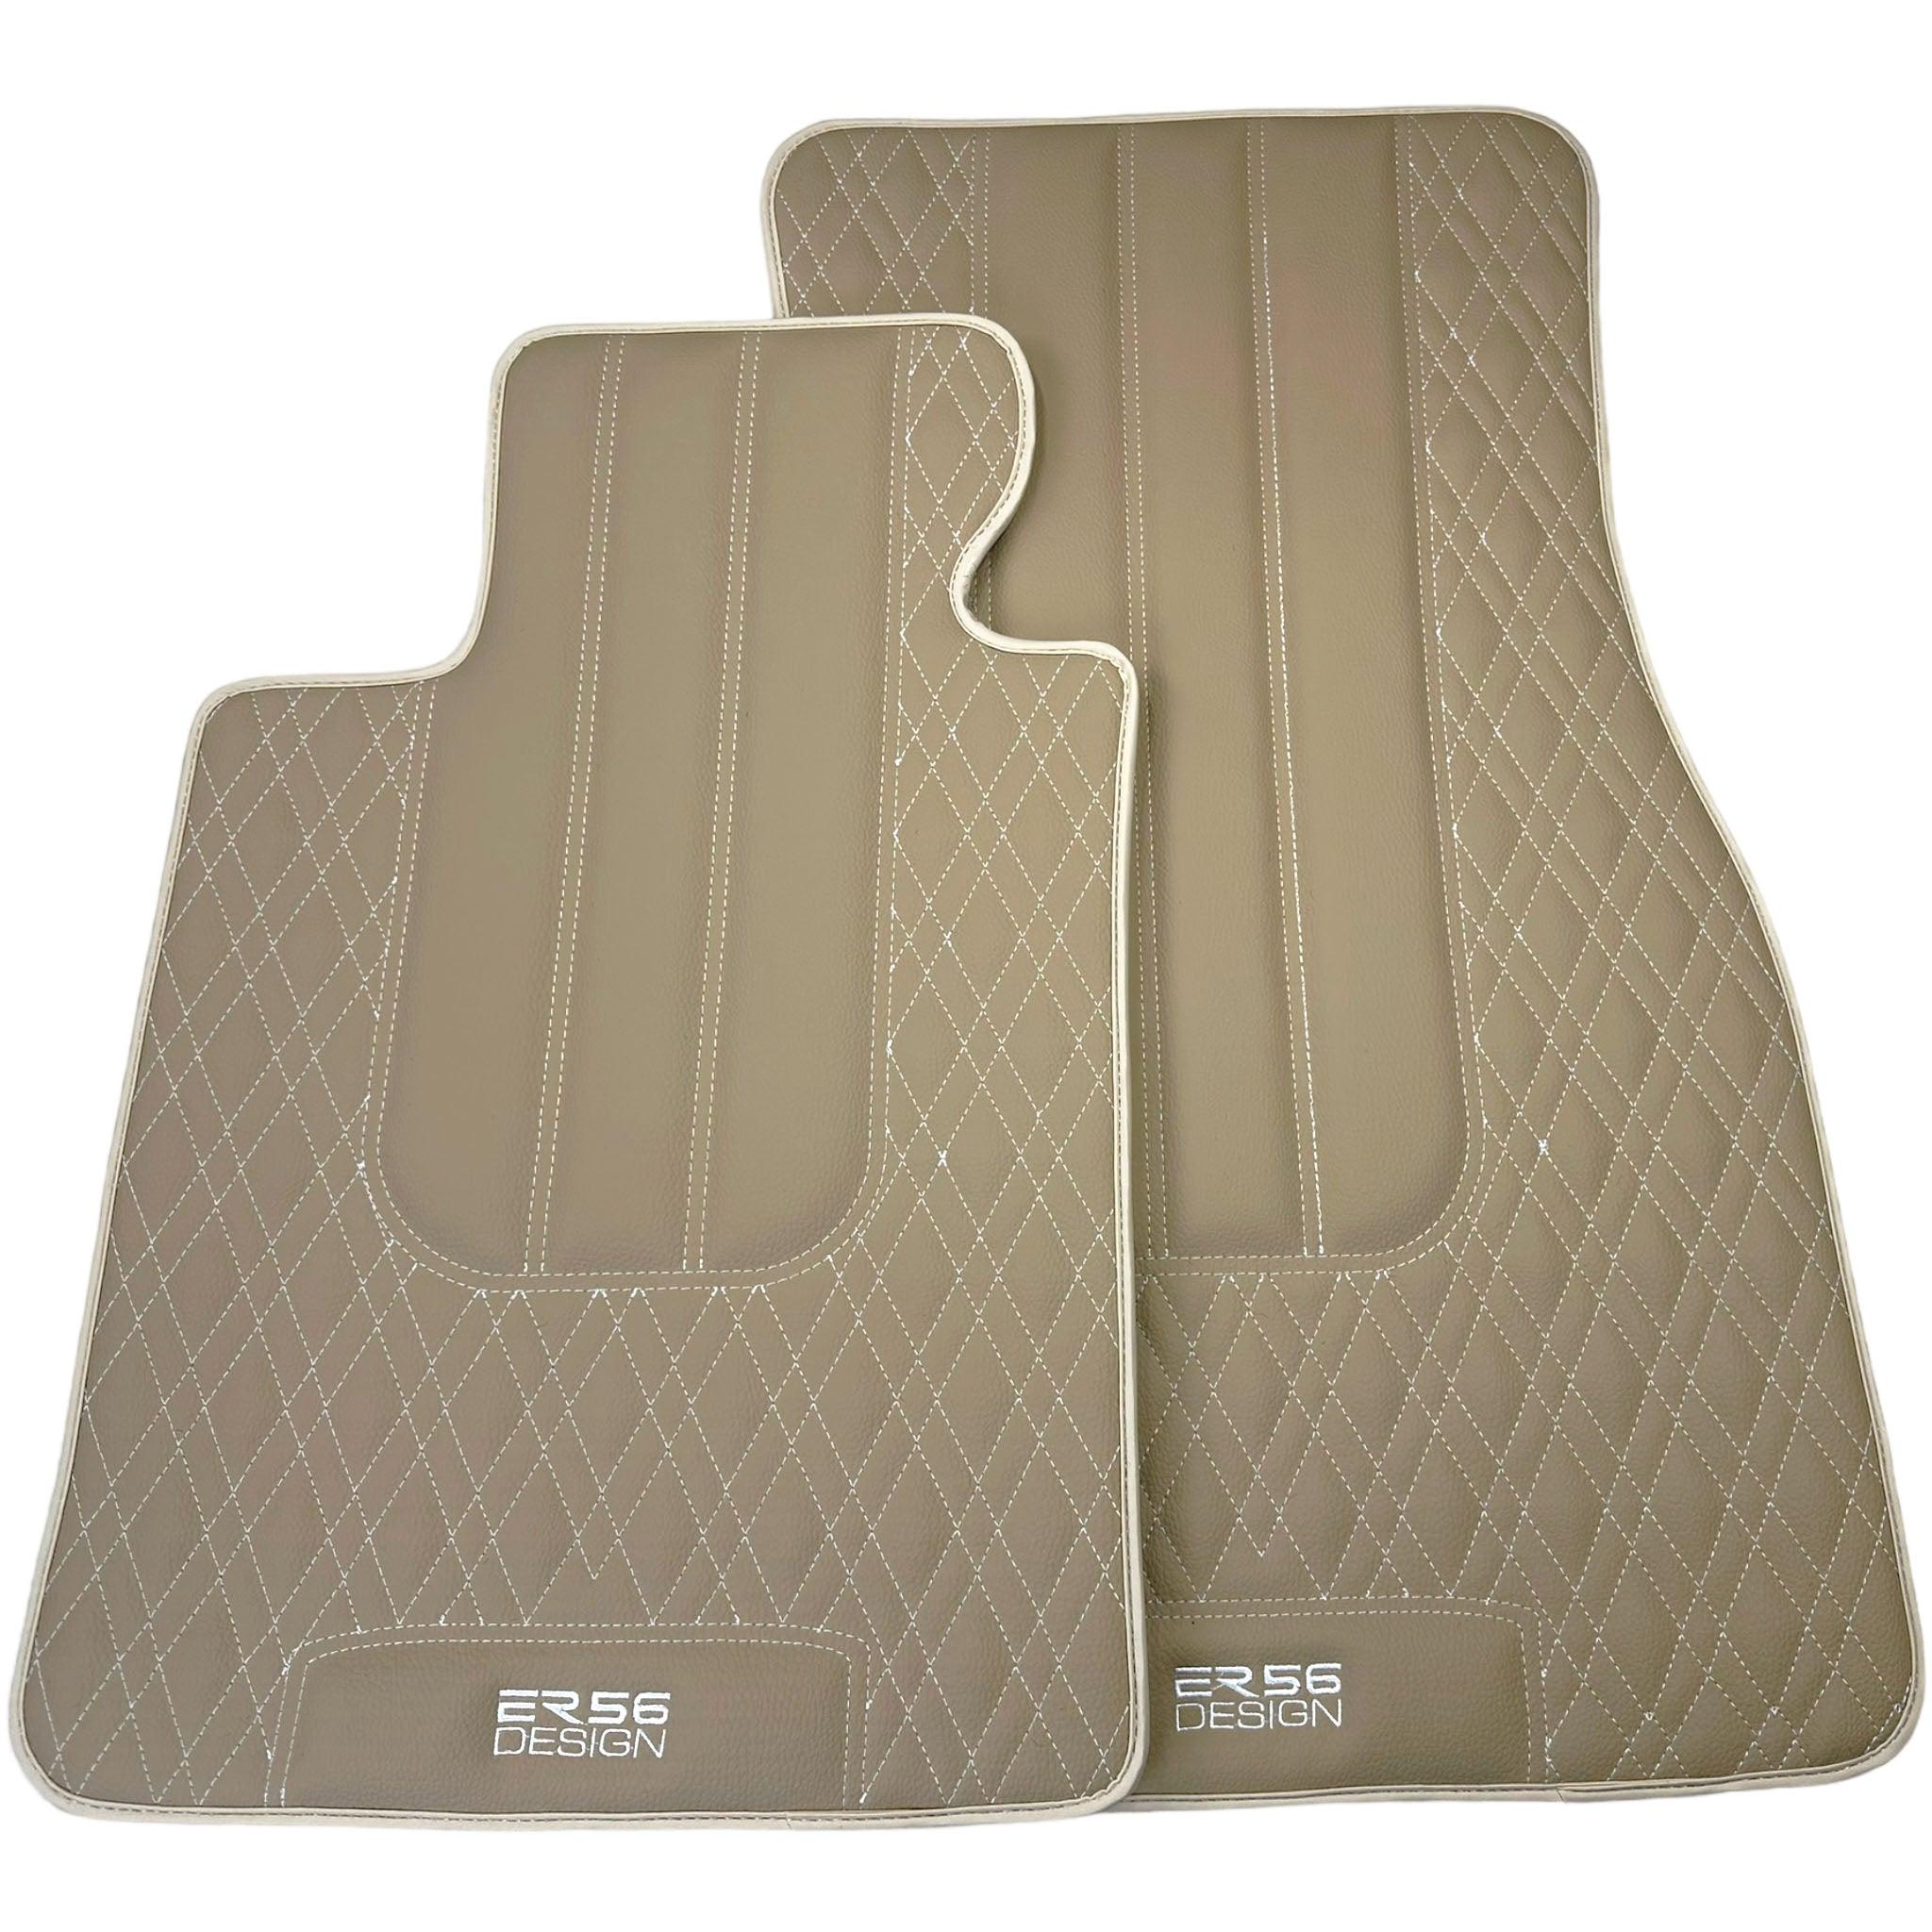 Beige Leather Floor Floor Mats For BMW 8 Series Gran Coupe G16 | Fighter Jet Edition AutoWin Brand |Sky Blue Trim